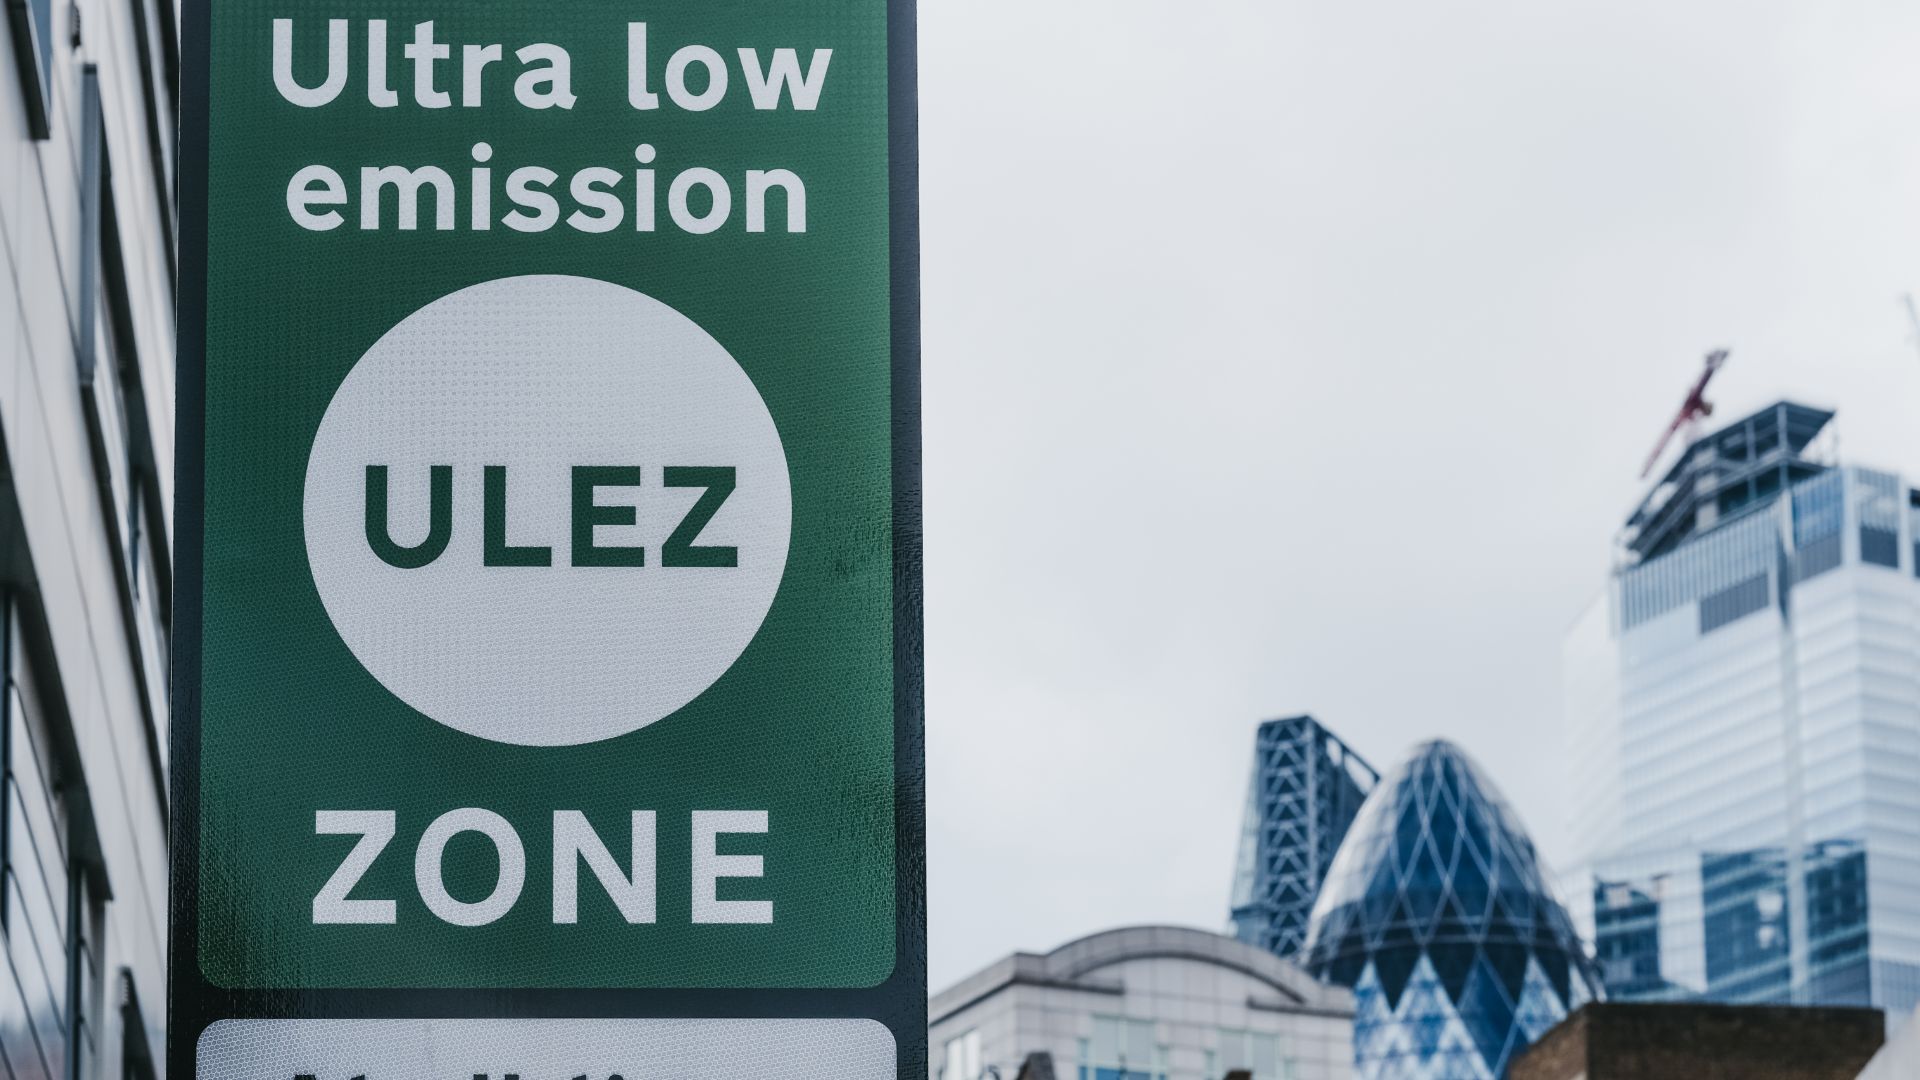 ULEZ pricing poorest off the road